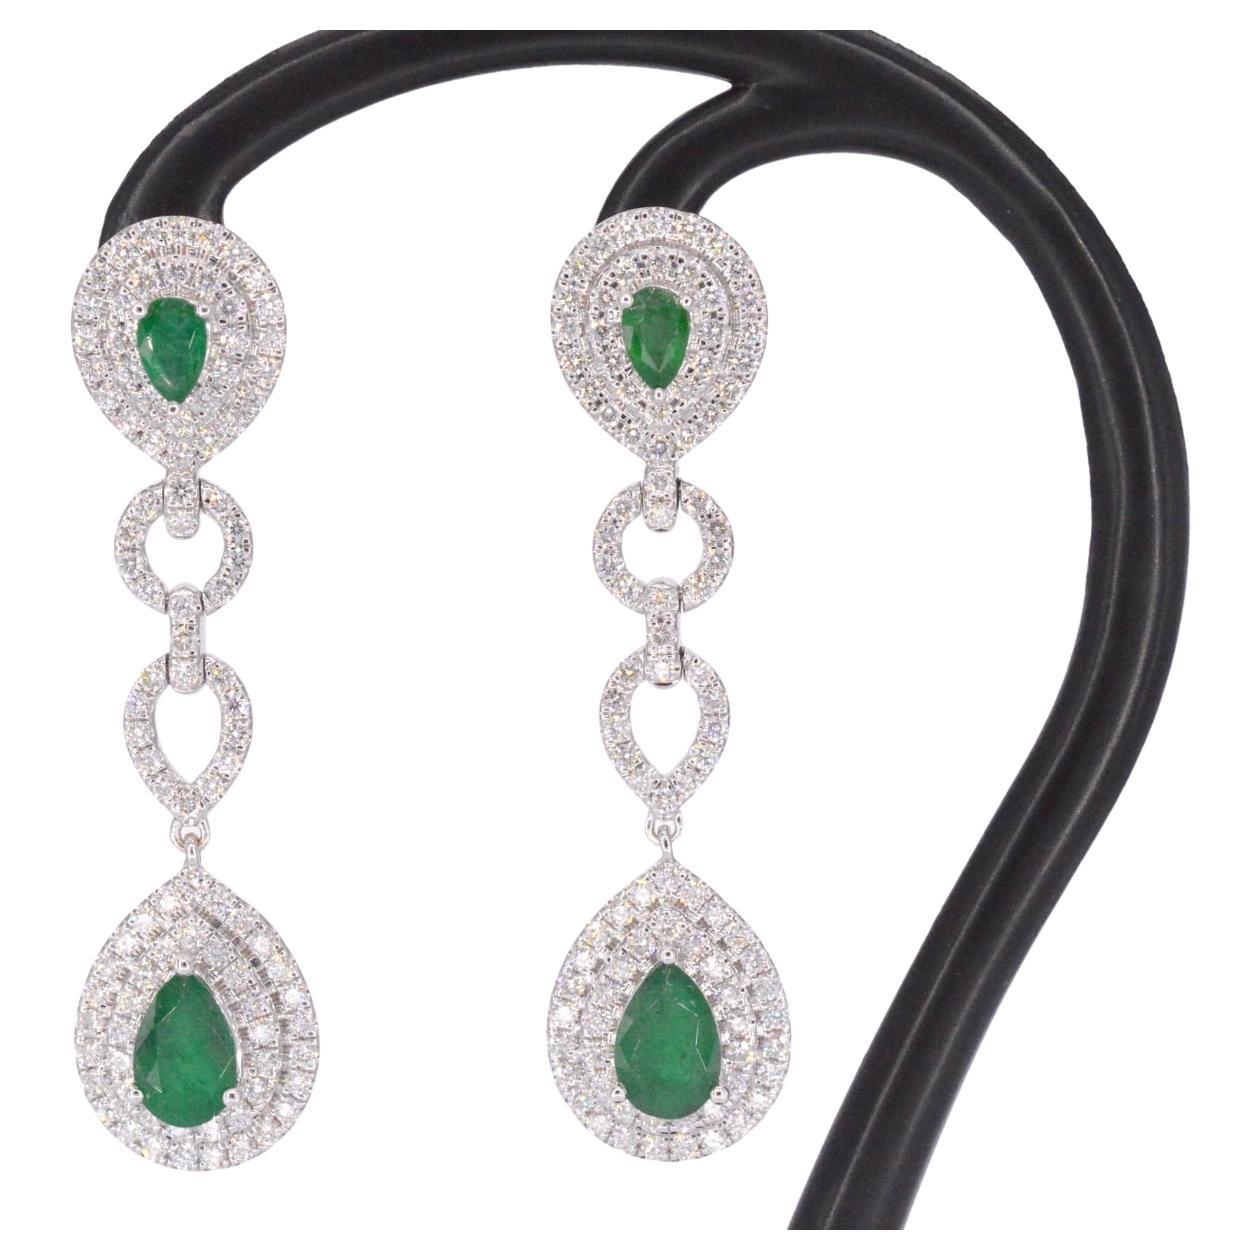 White gold earrings with diamonds and emeralds